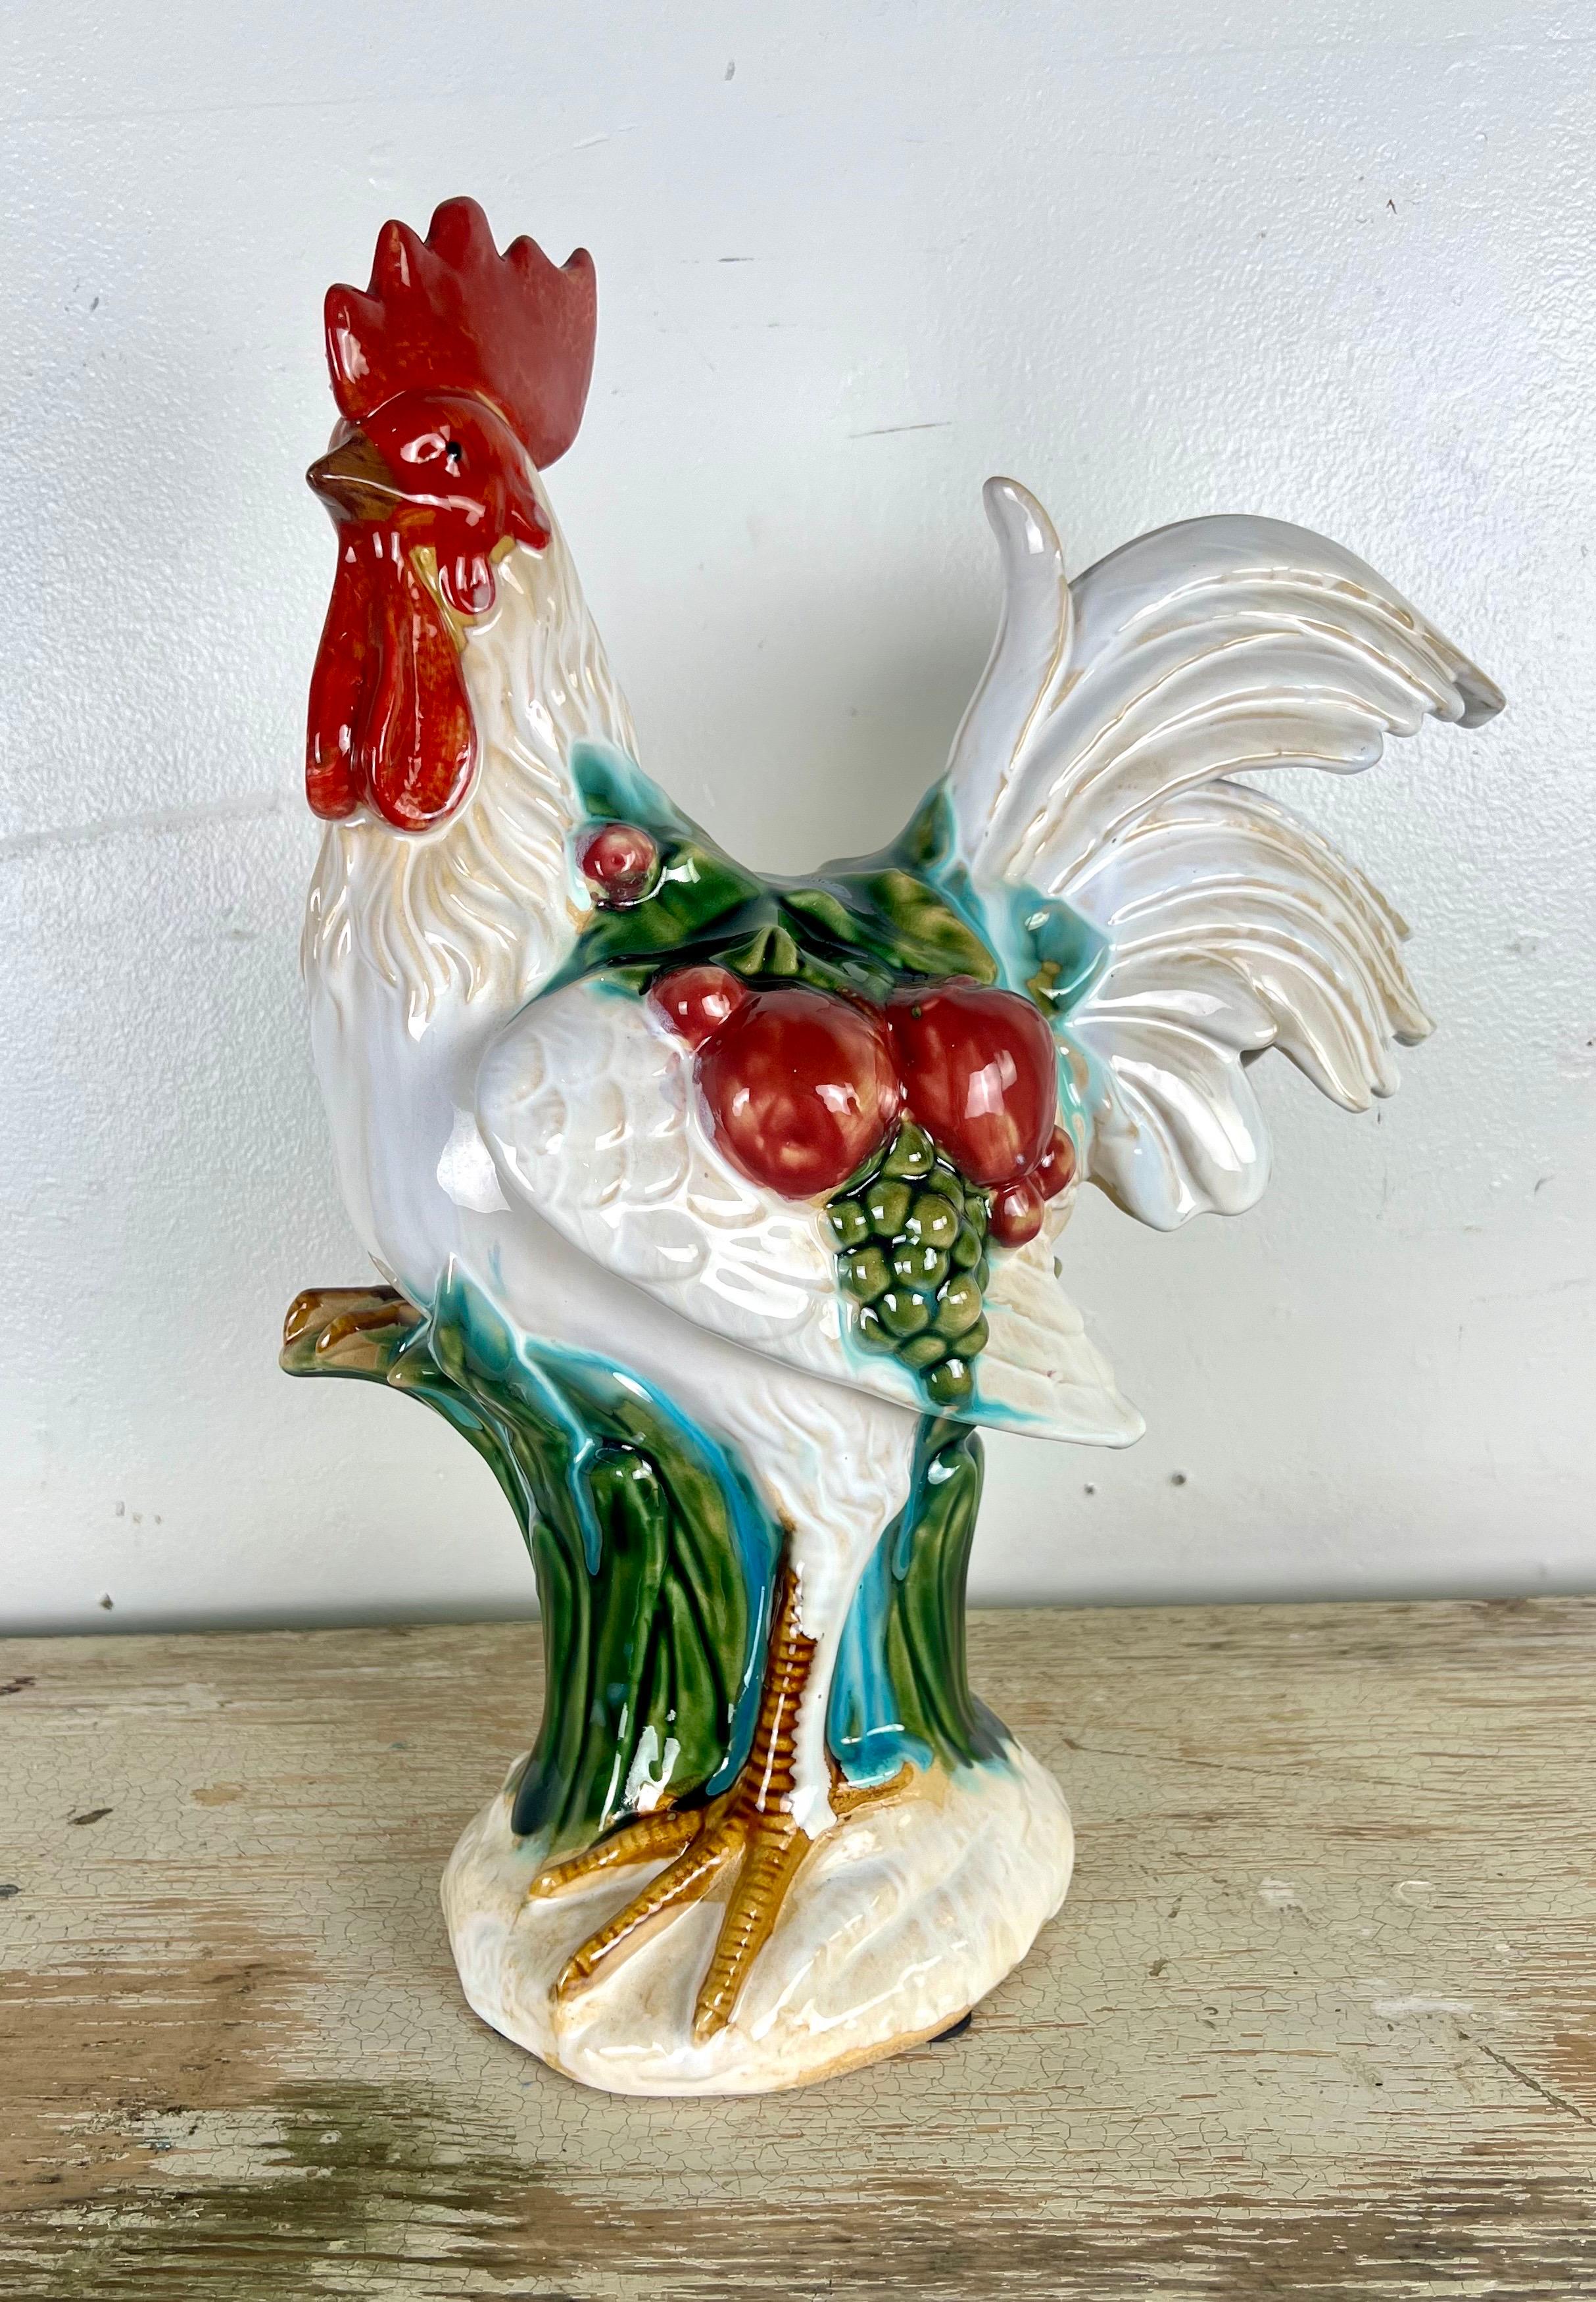 A quaint French glazed ceramic figure, a chicken that carries the charm of a rustic countryside kitchen.  This figure is meticulously adorned with an array of vibrant fruits; ripe apples and lush grapes are depicted in a palette of reds, greens,